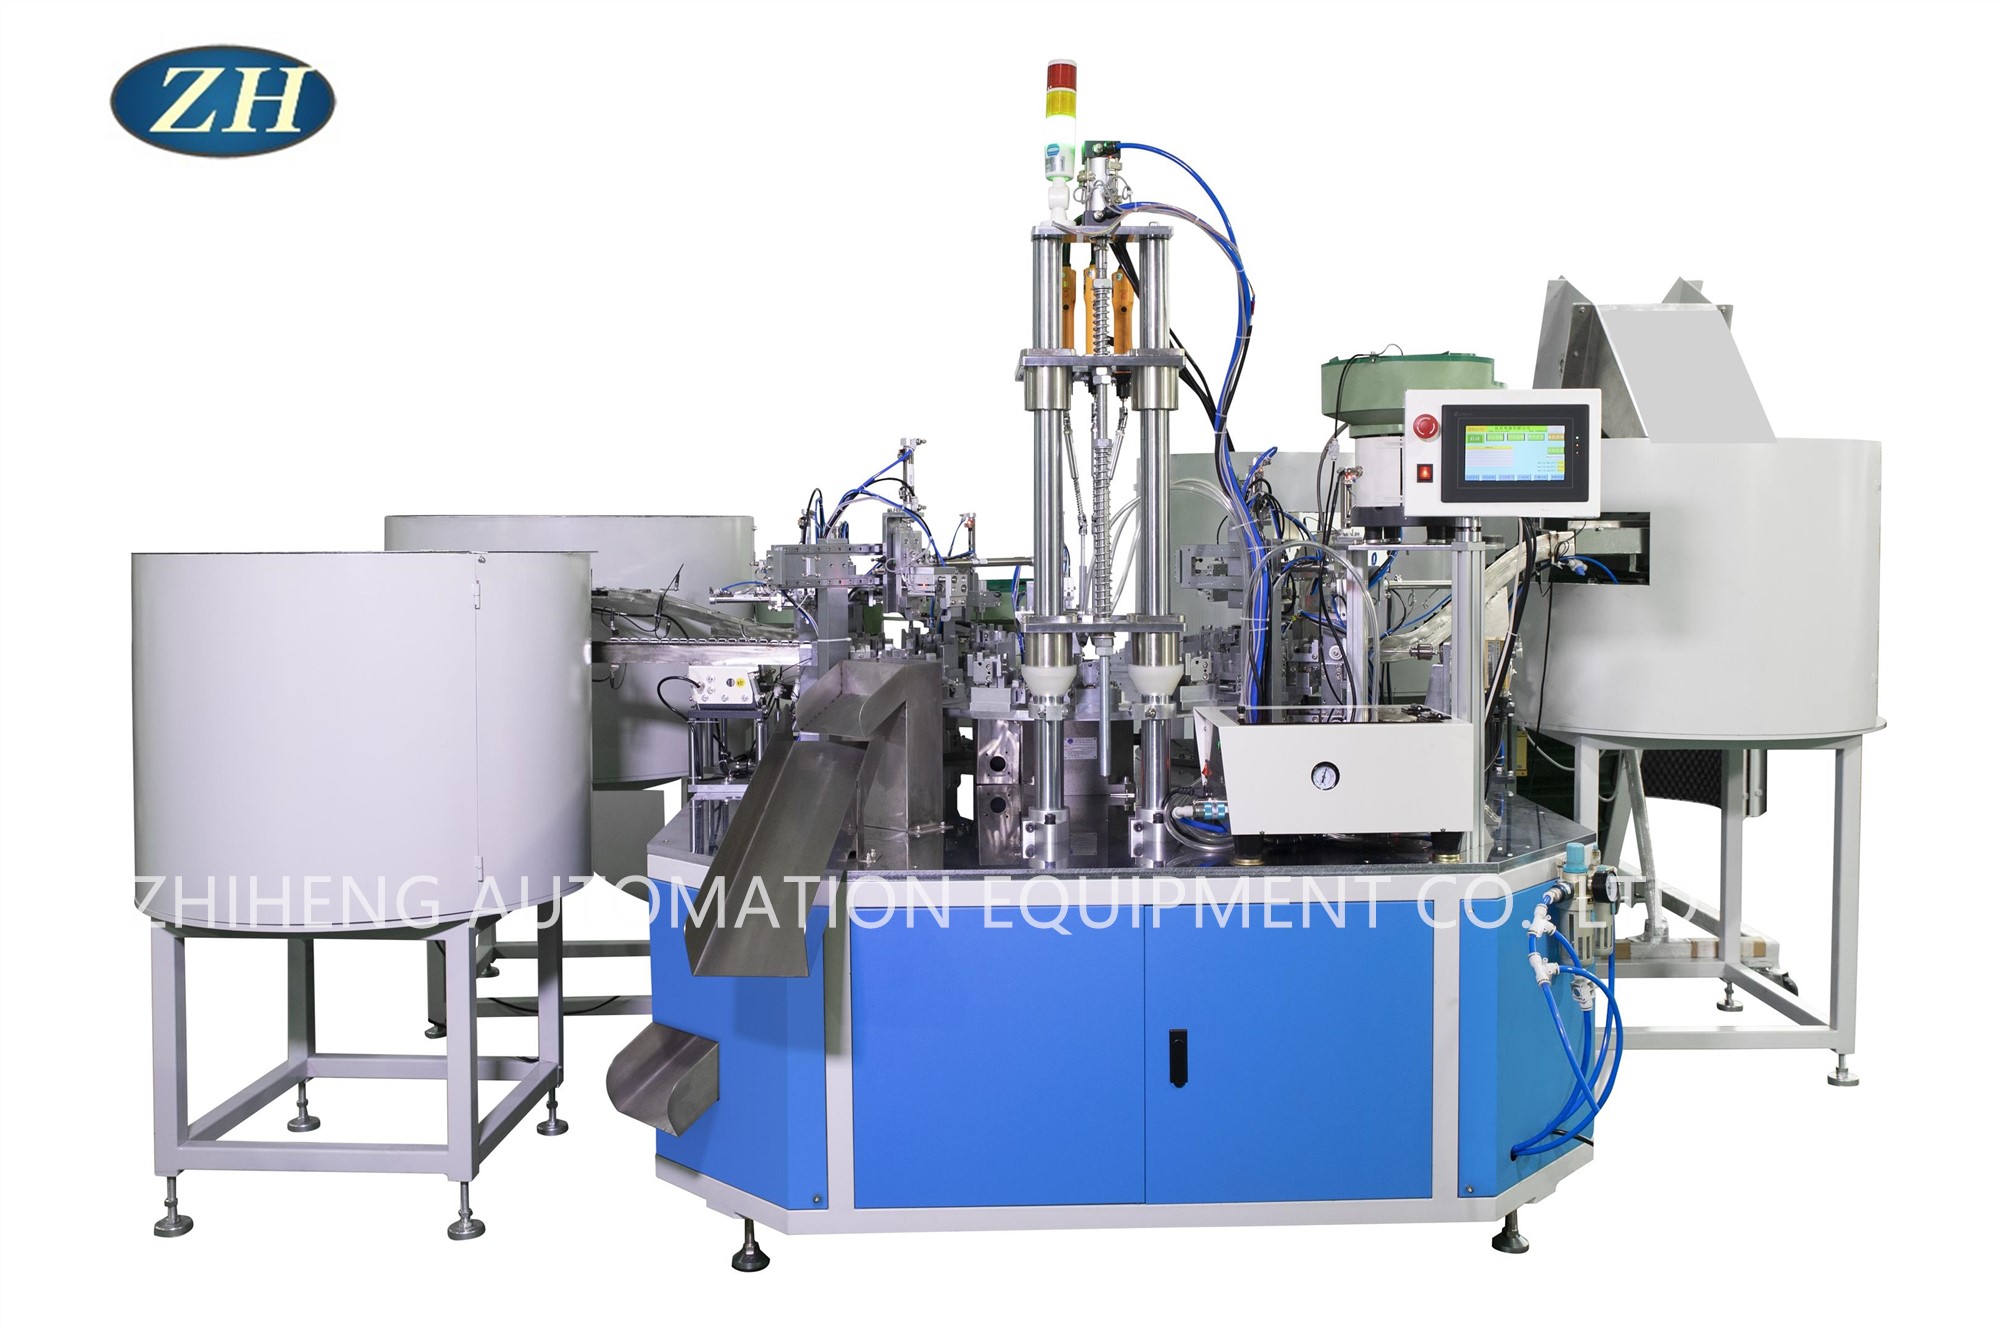 Automatic Assembly Machine for Air Fryer Component